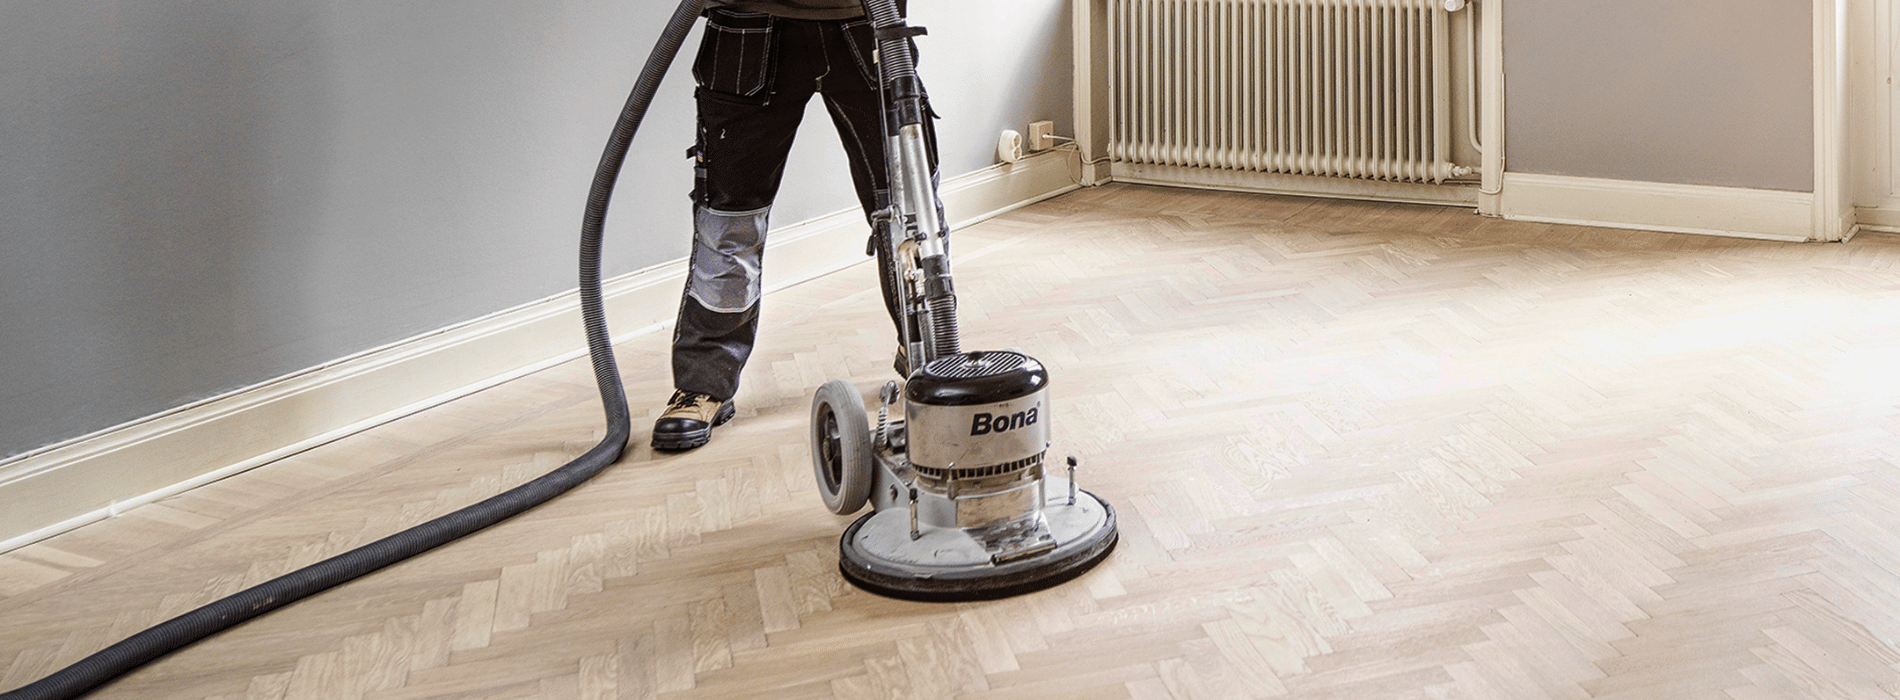 In West Norwood, SE27, Mr Sander® are using a Bona FlexiSand 1.9 buffer sander with Ø 407 mm dimension, 1.9 kW effect, 230 V voltage, and 50 Hz/60 Hz frequency. They connect it to a dust extraction system with a HEPA filter for clean and efficient results while sanding a parquet floor.